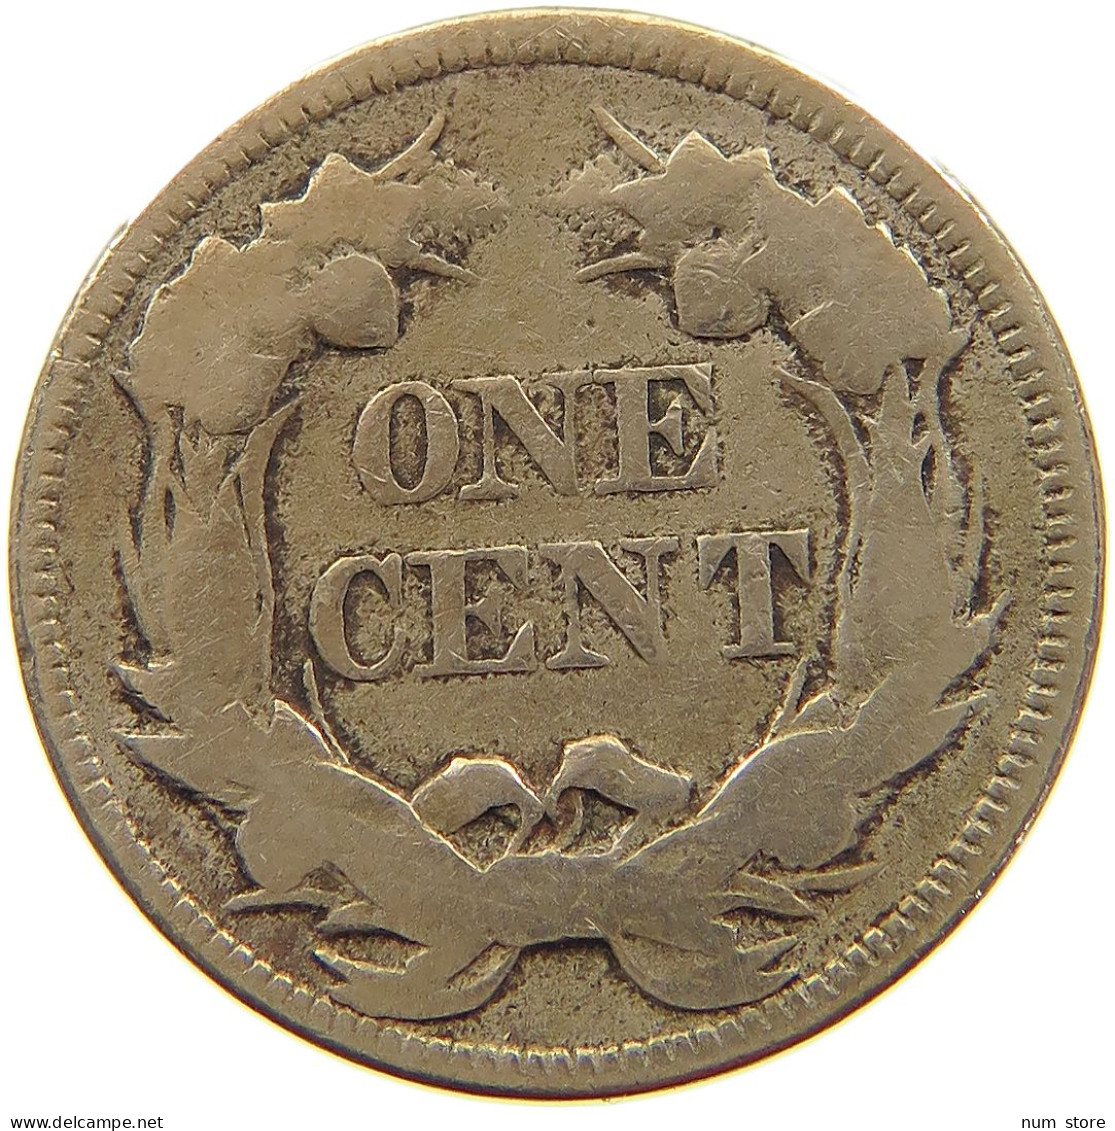 UNITED STATES OF AMERICA CENT 1857 FLYING EAGLE #a014 0015 - 1856-1858: Flying Eagle (Aigle Volant)